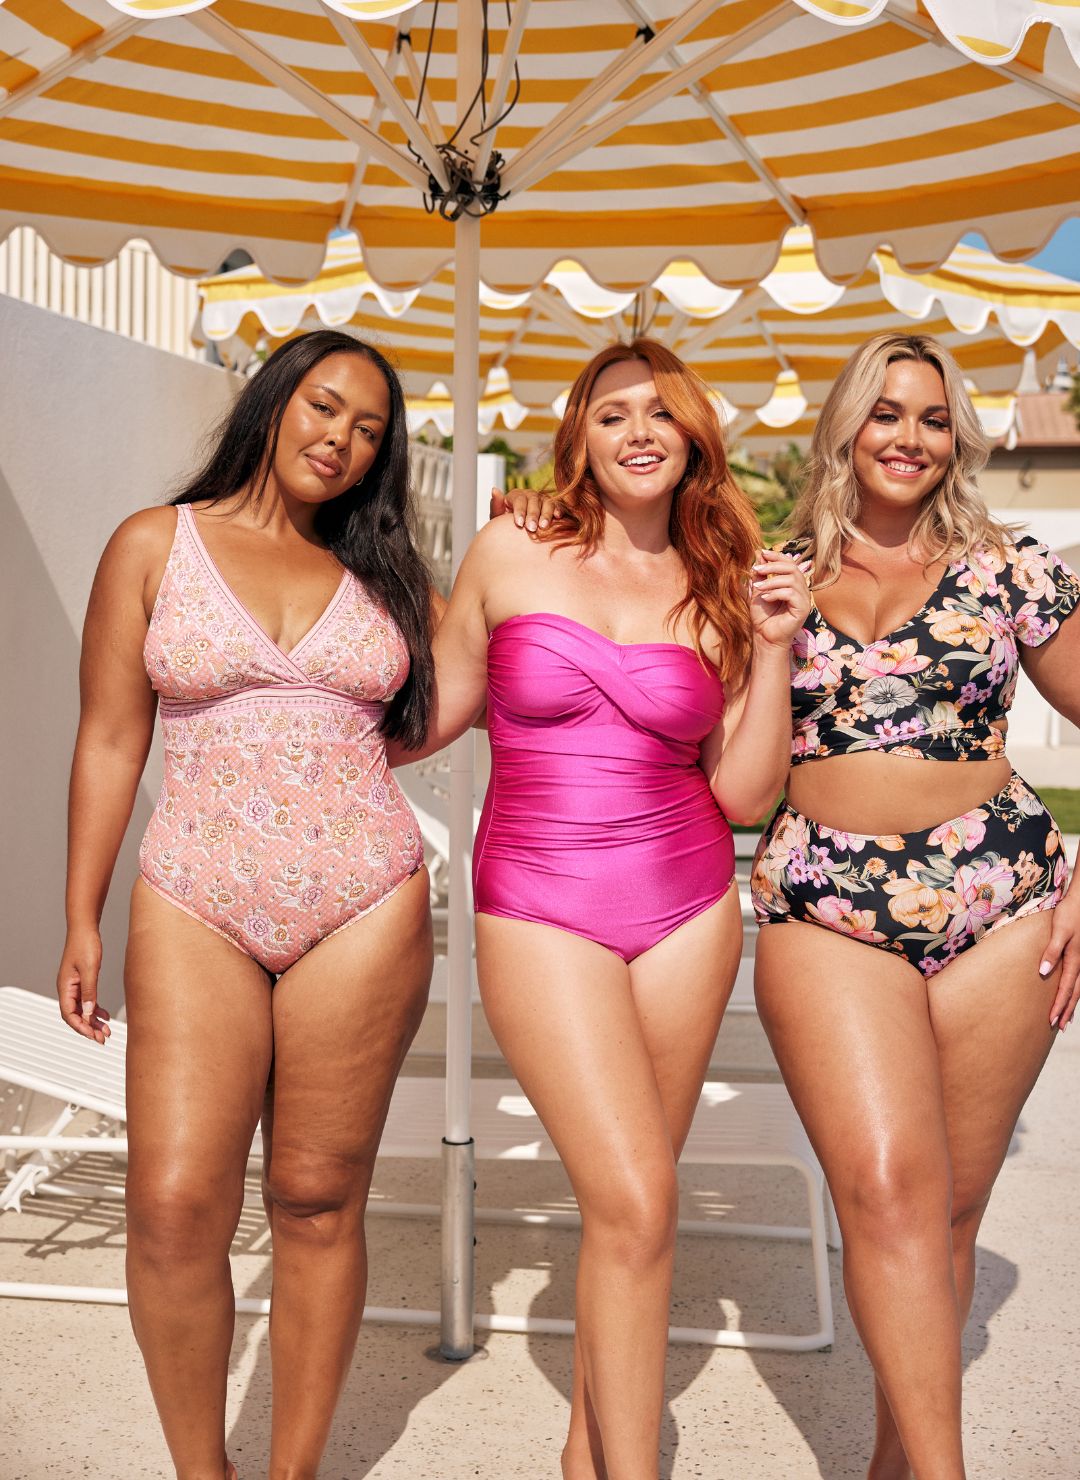 What is plus size? And what does it really mean?